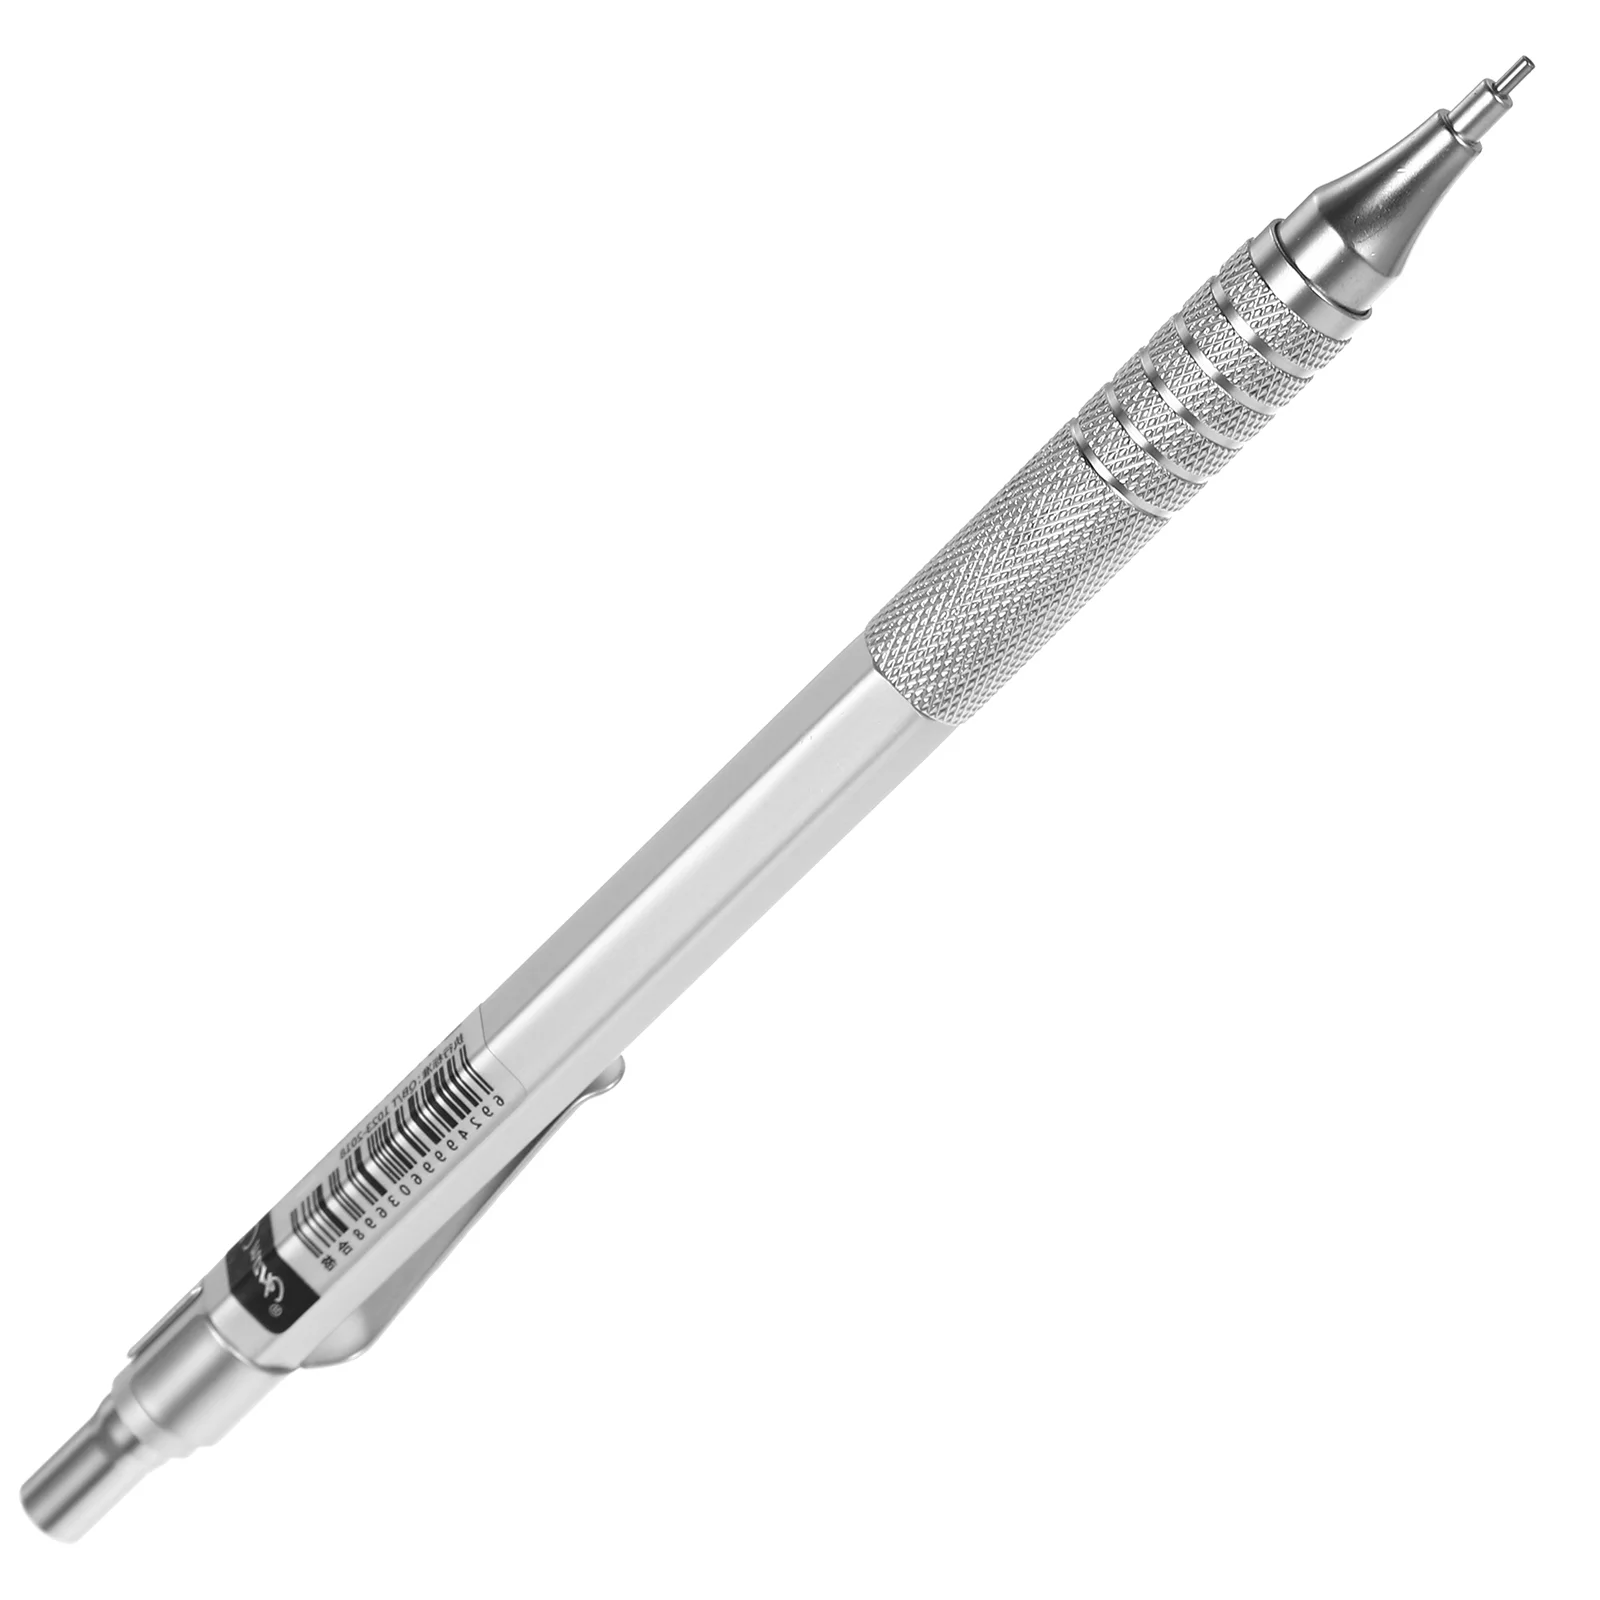 07mm Mechanical Pencil Starter Set Automatic Pencils Refill Leads for Writing Drawing Drafting(Silver) drafting silver карандаш